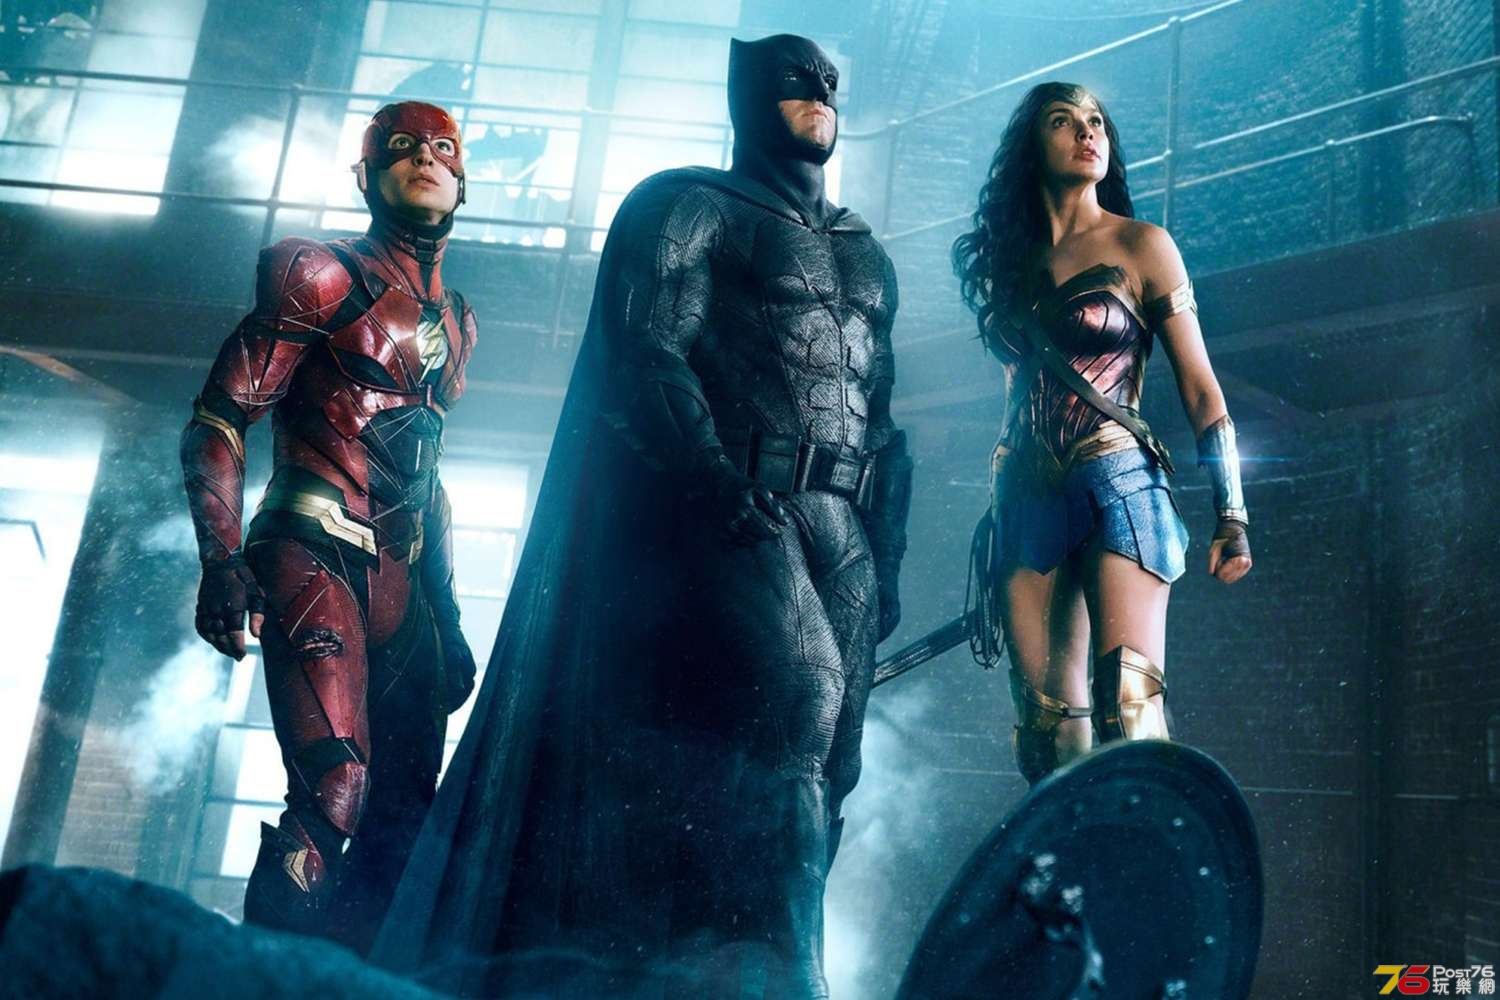 justice-league-the-snyder-cut-first-look-clip-release-info-0.jpg